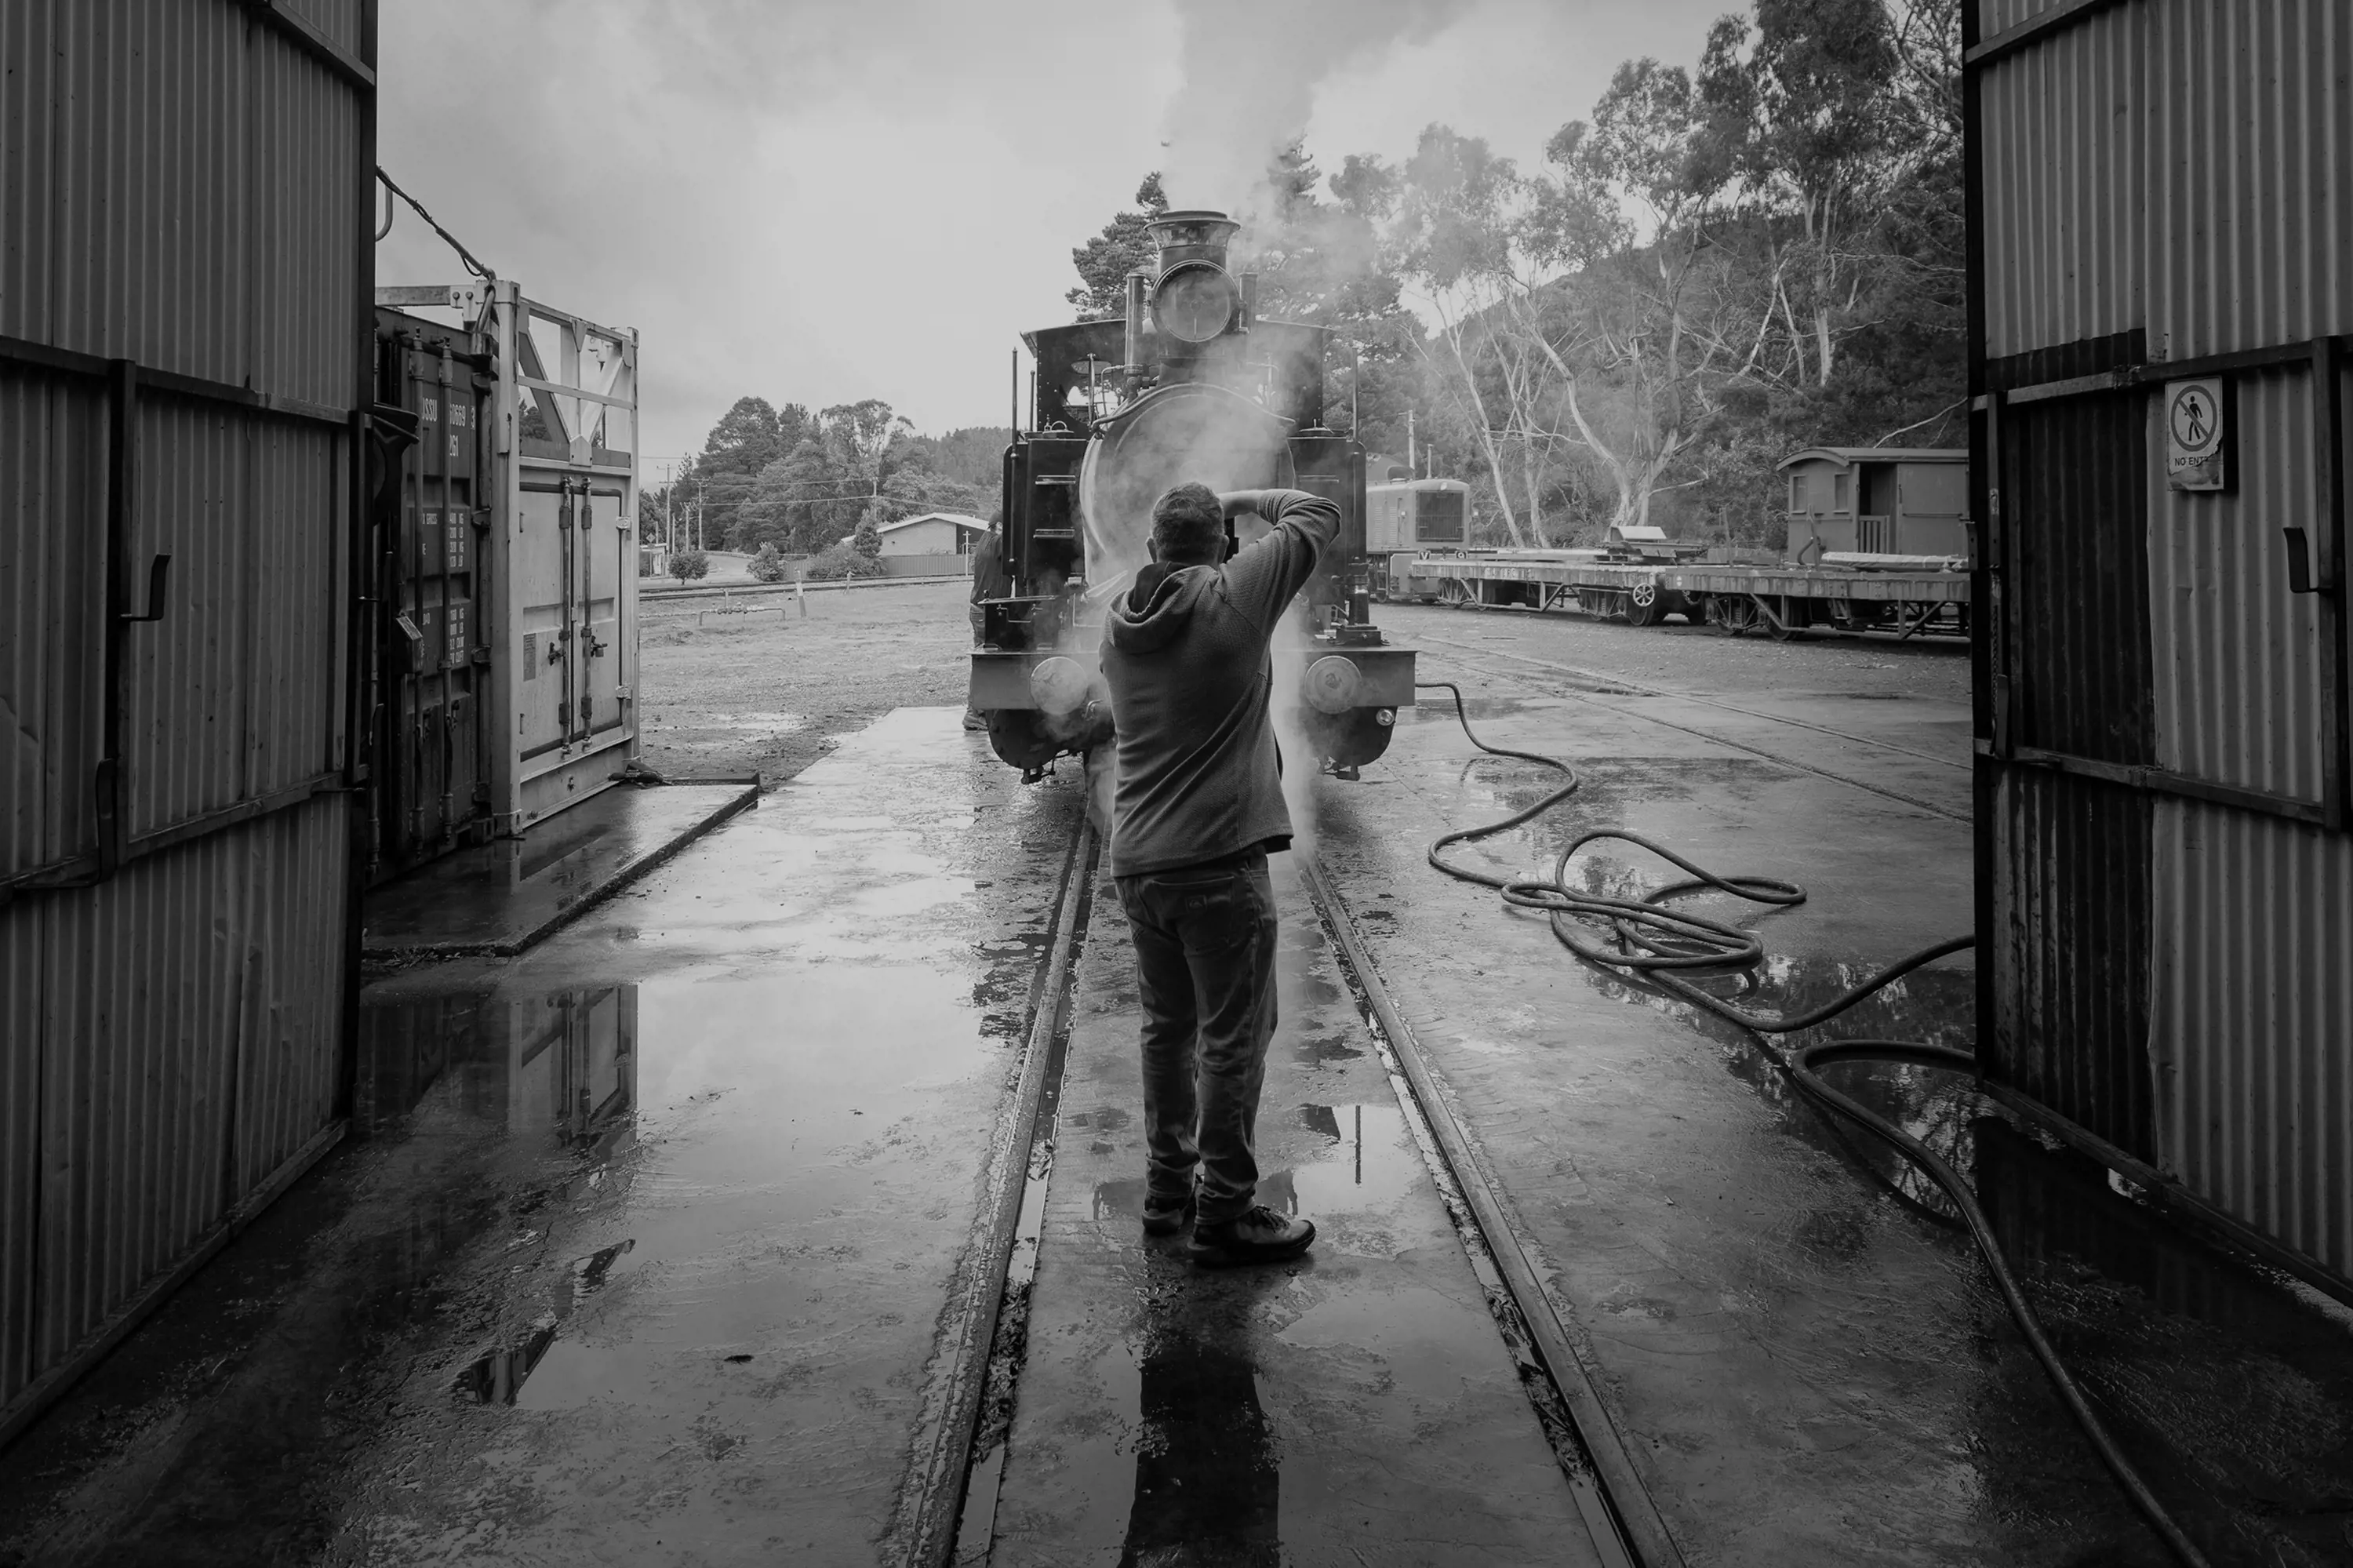 A man stands on the tracks of a locomotive steam train in a maintenance yard and takes a photograph.